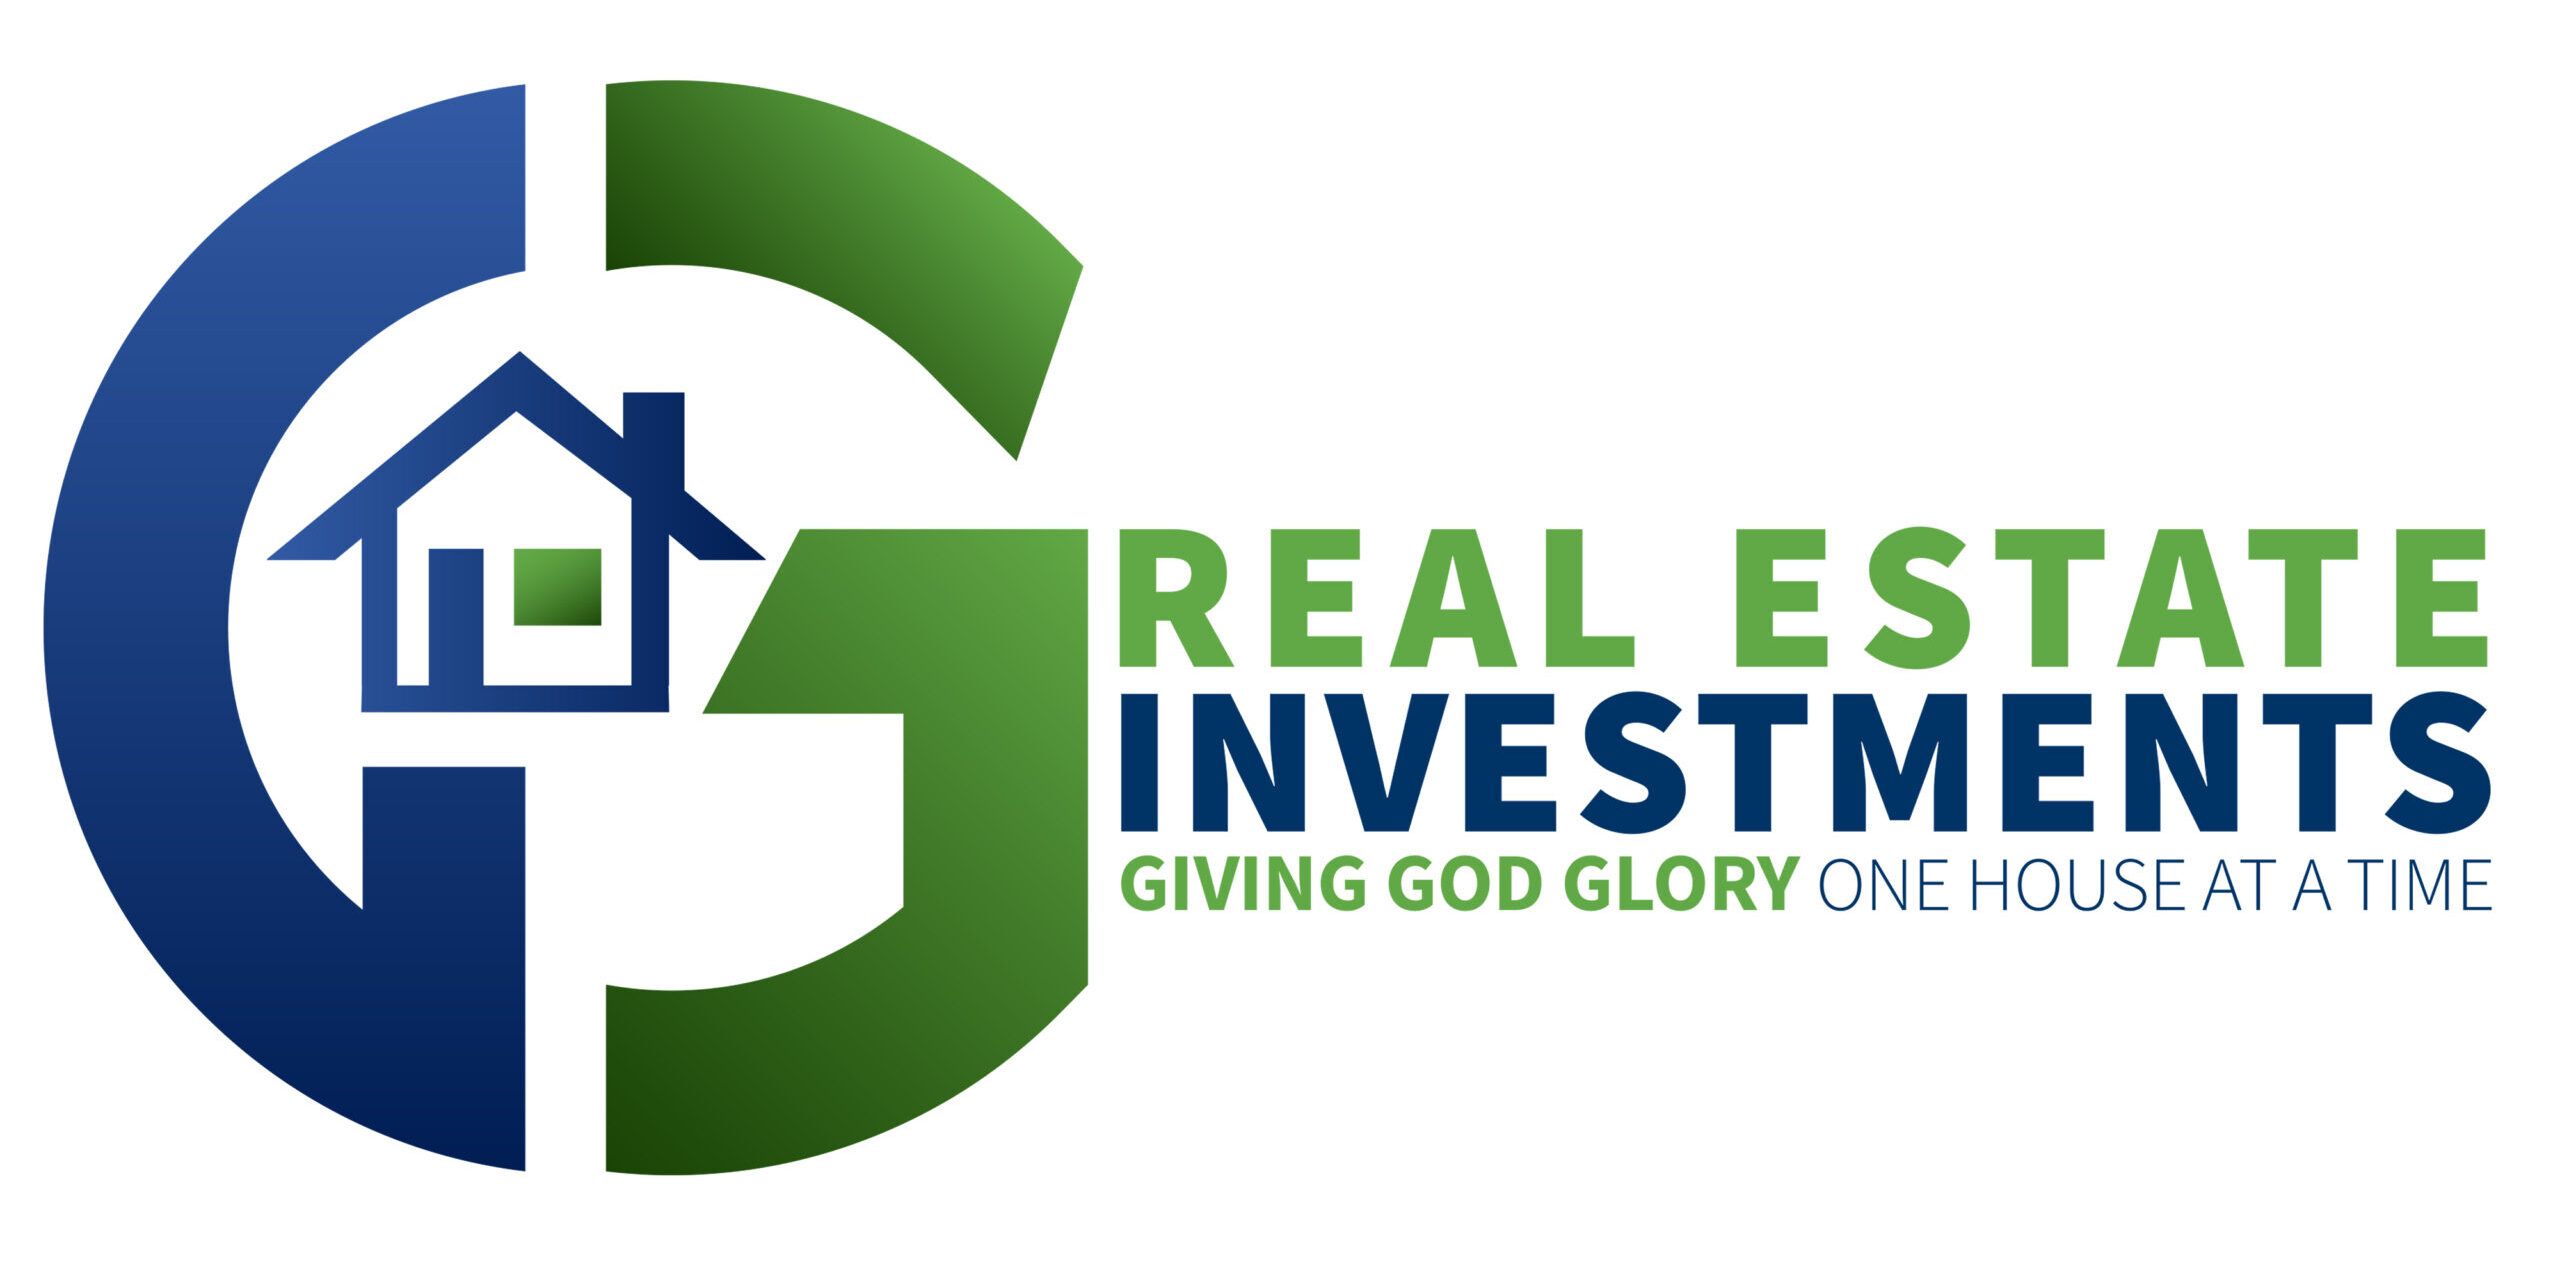 G3 Real Estate Investments